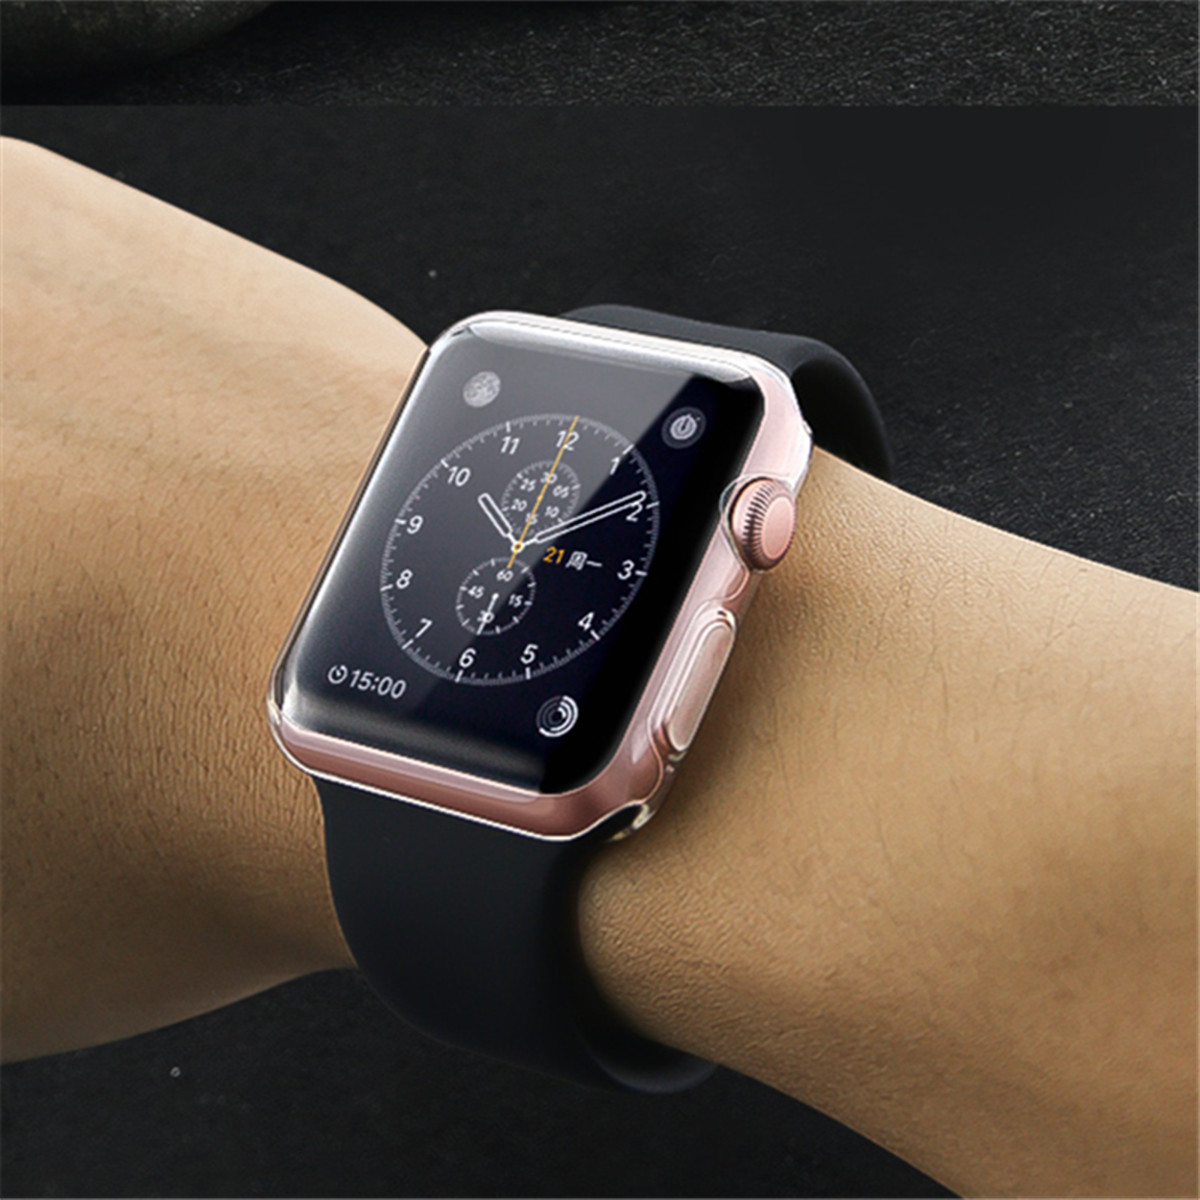 Transparent-Clear-Slim-Hard-Snap-On-Case-Cover-Screen-Protector-For-3842mm-Apple-Watch-Series-2-1132676-5